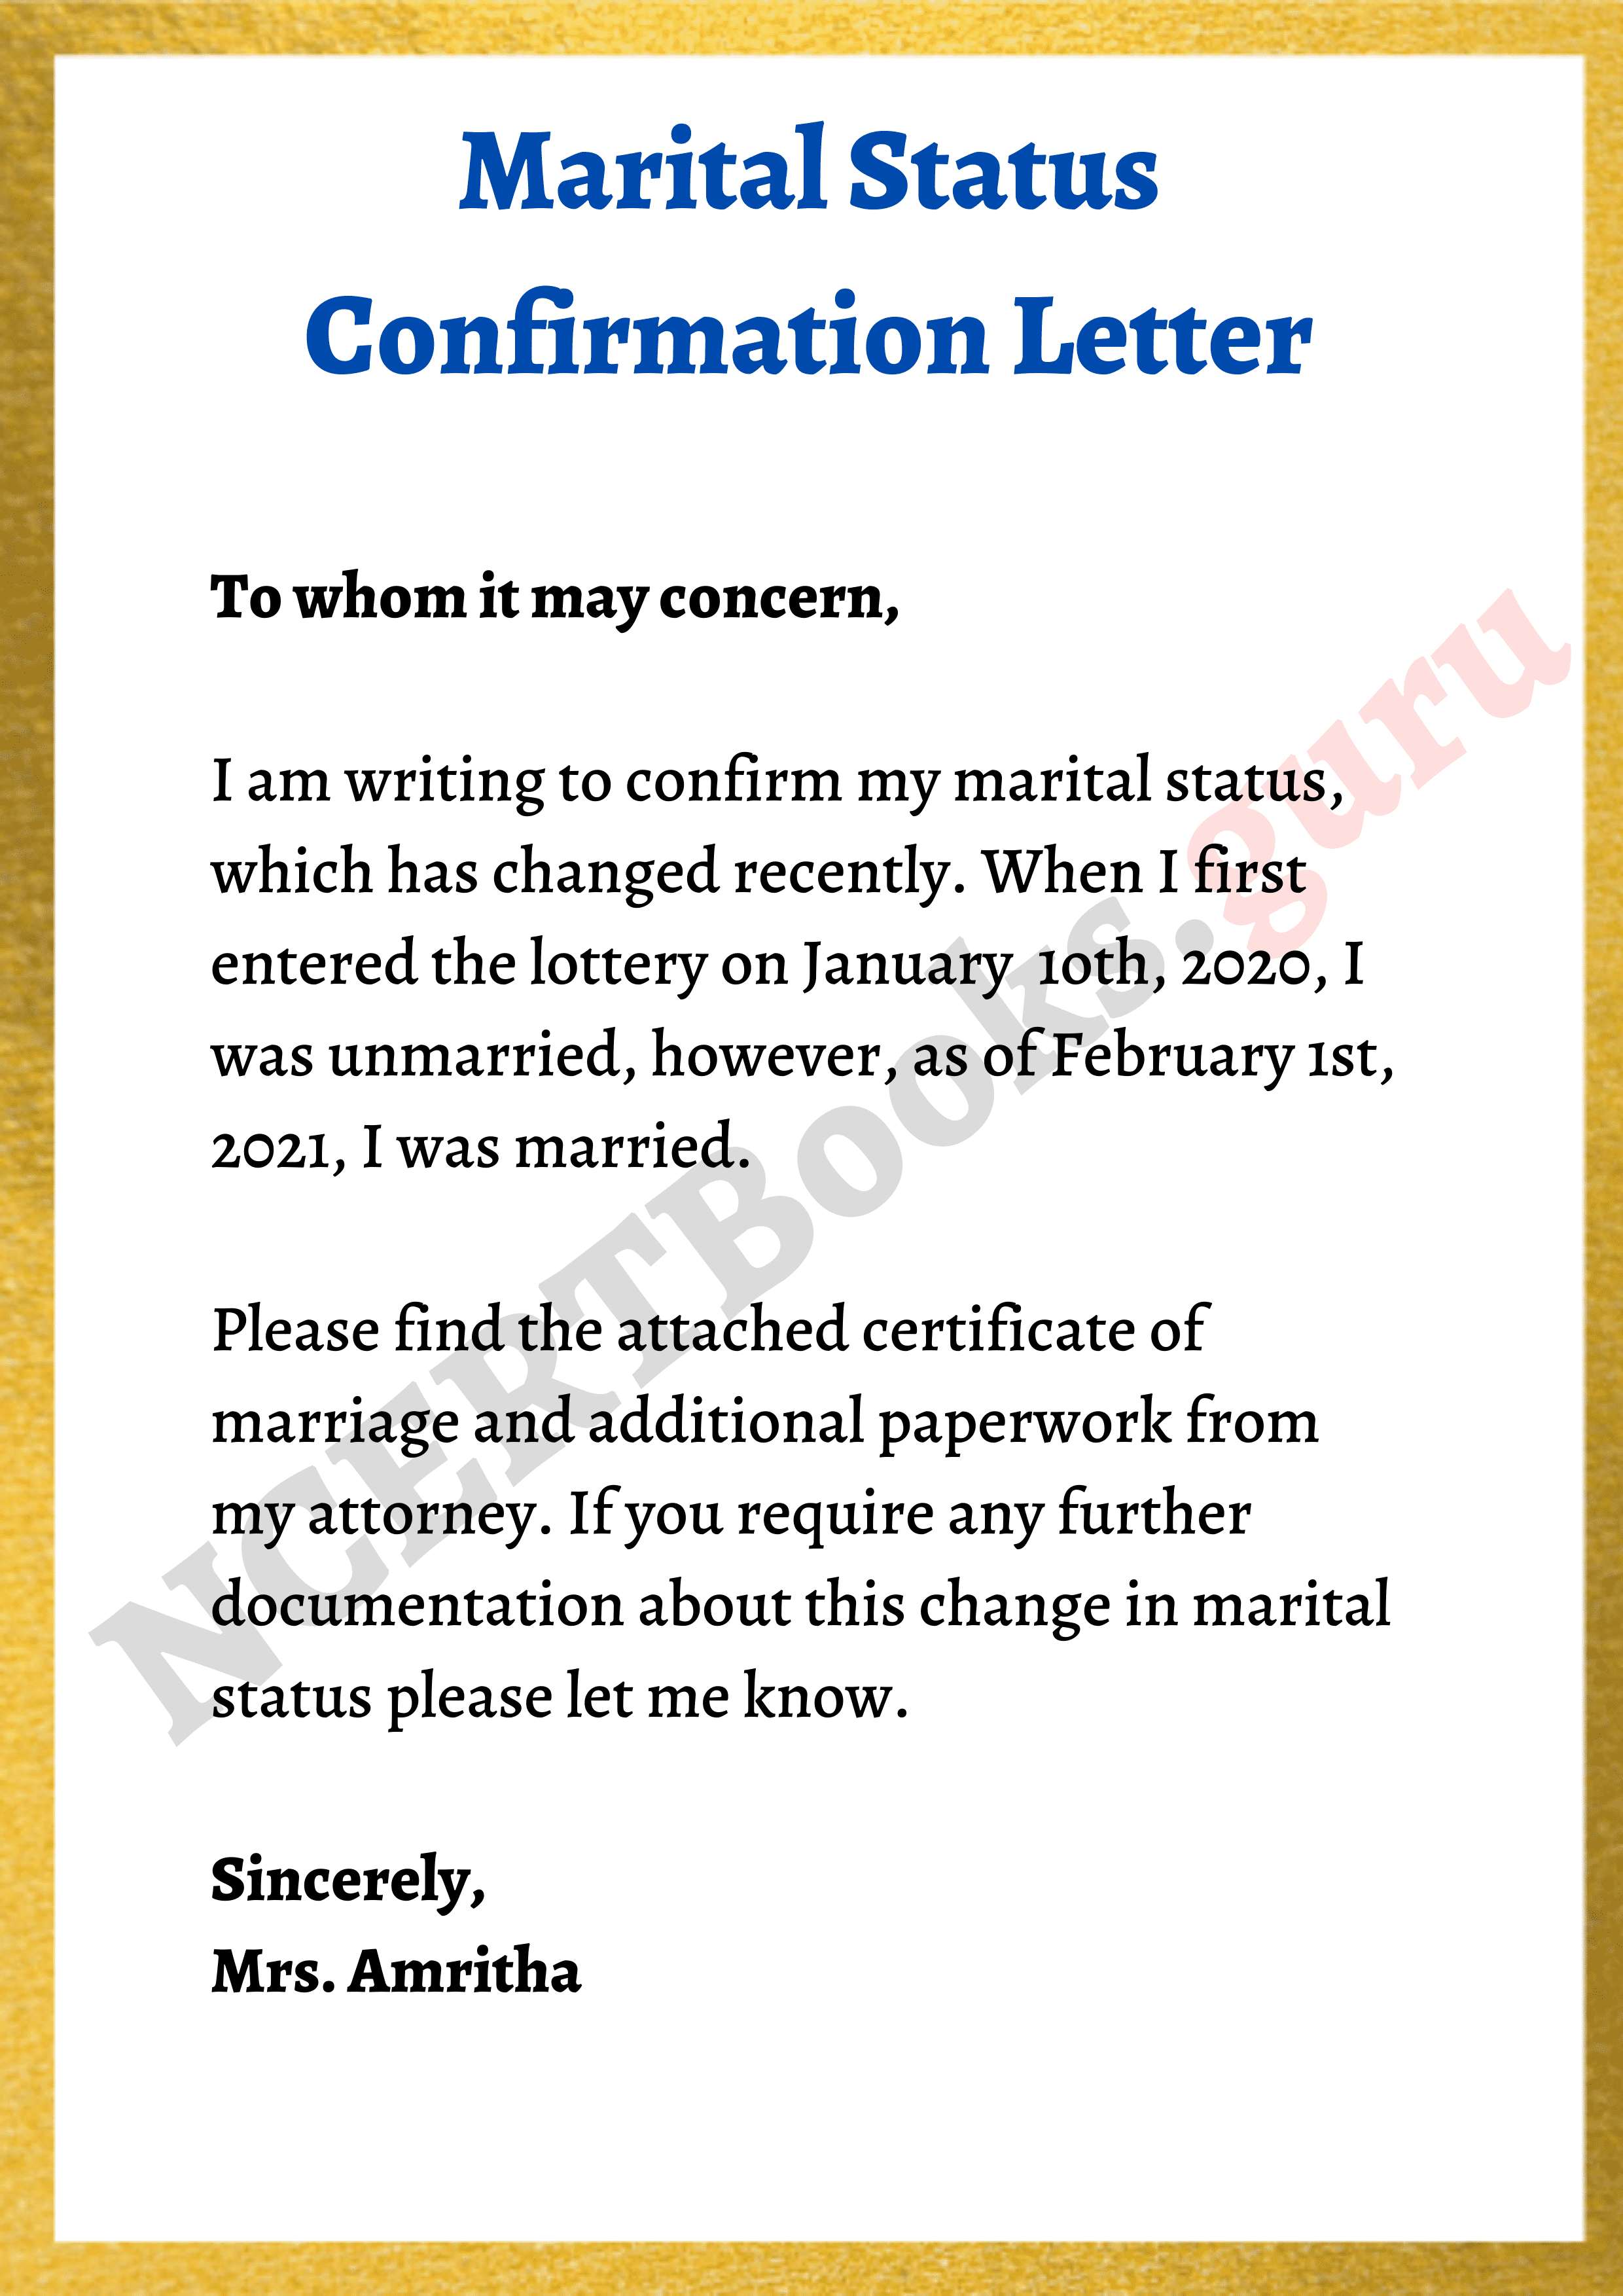 Letter of Confirmation on Marital Status